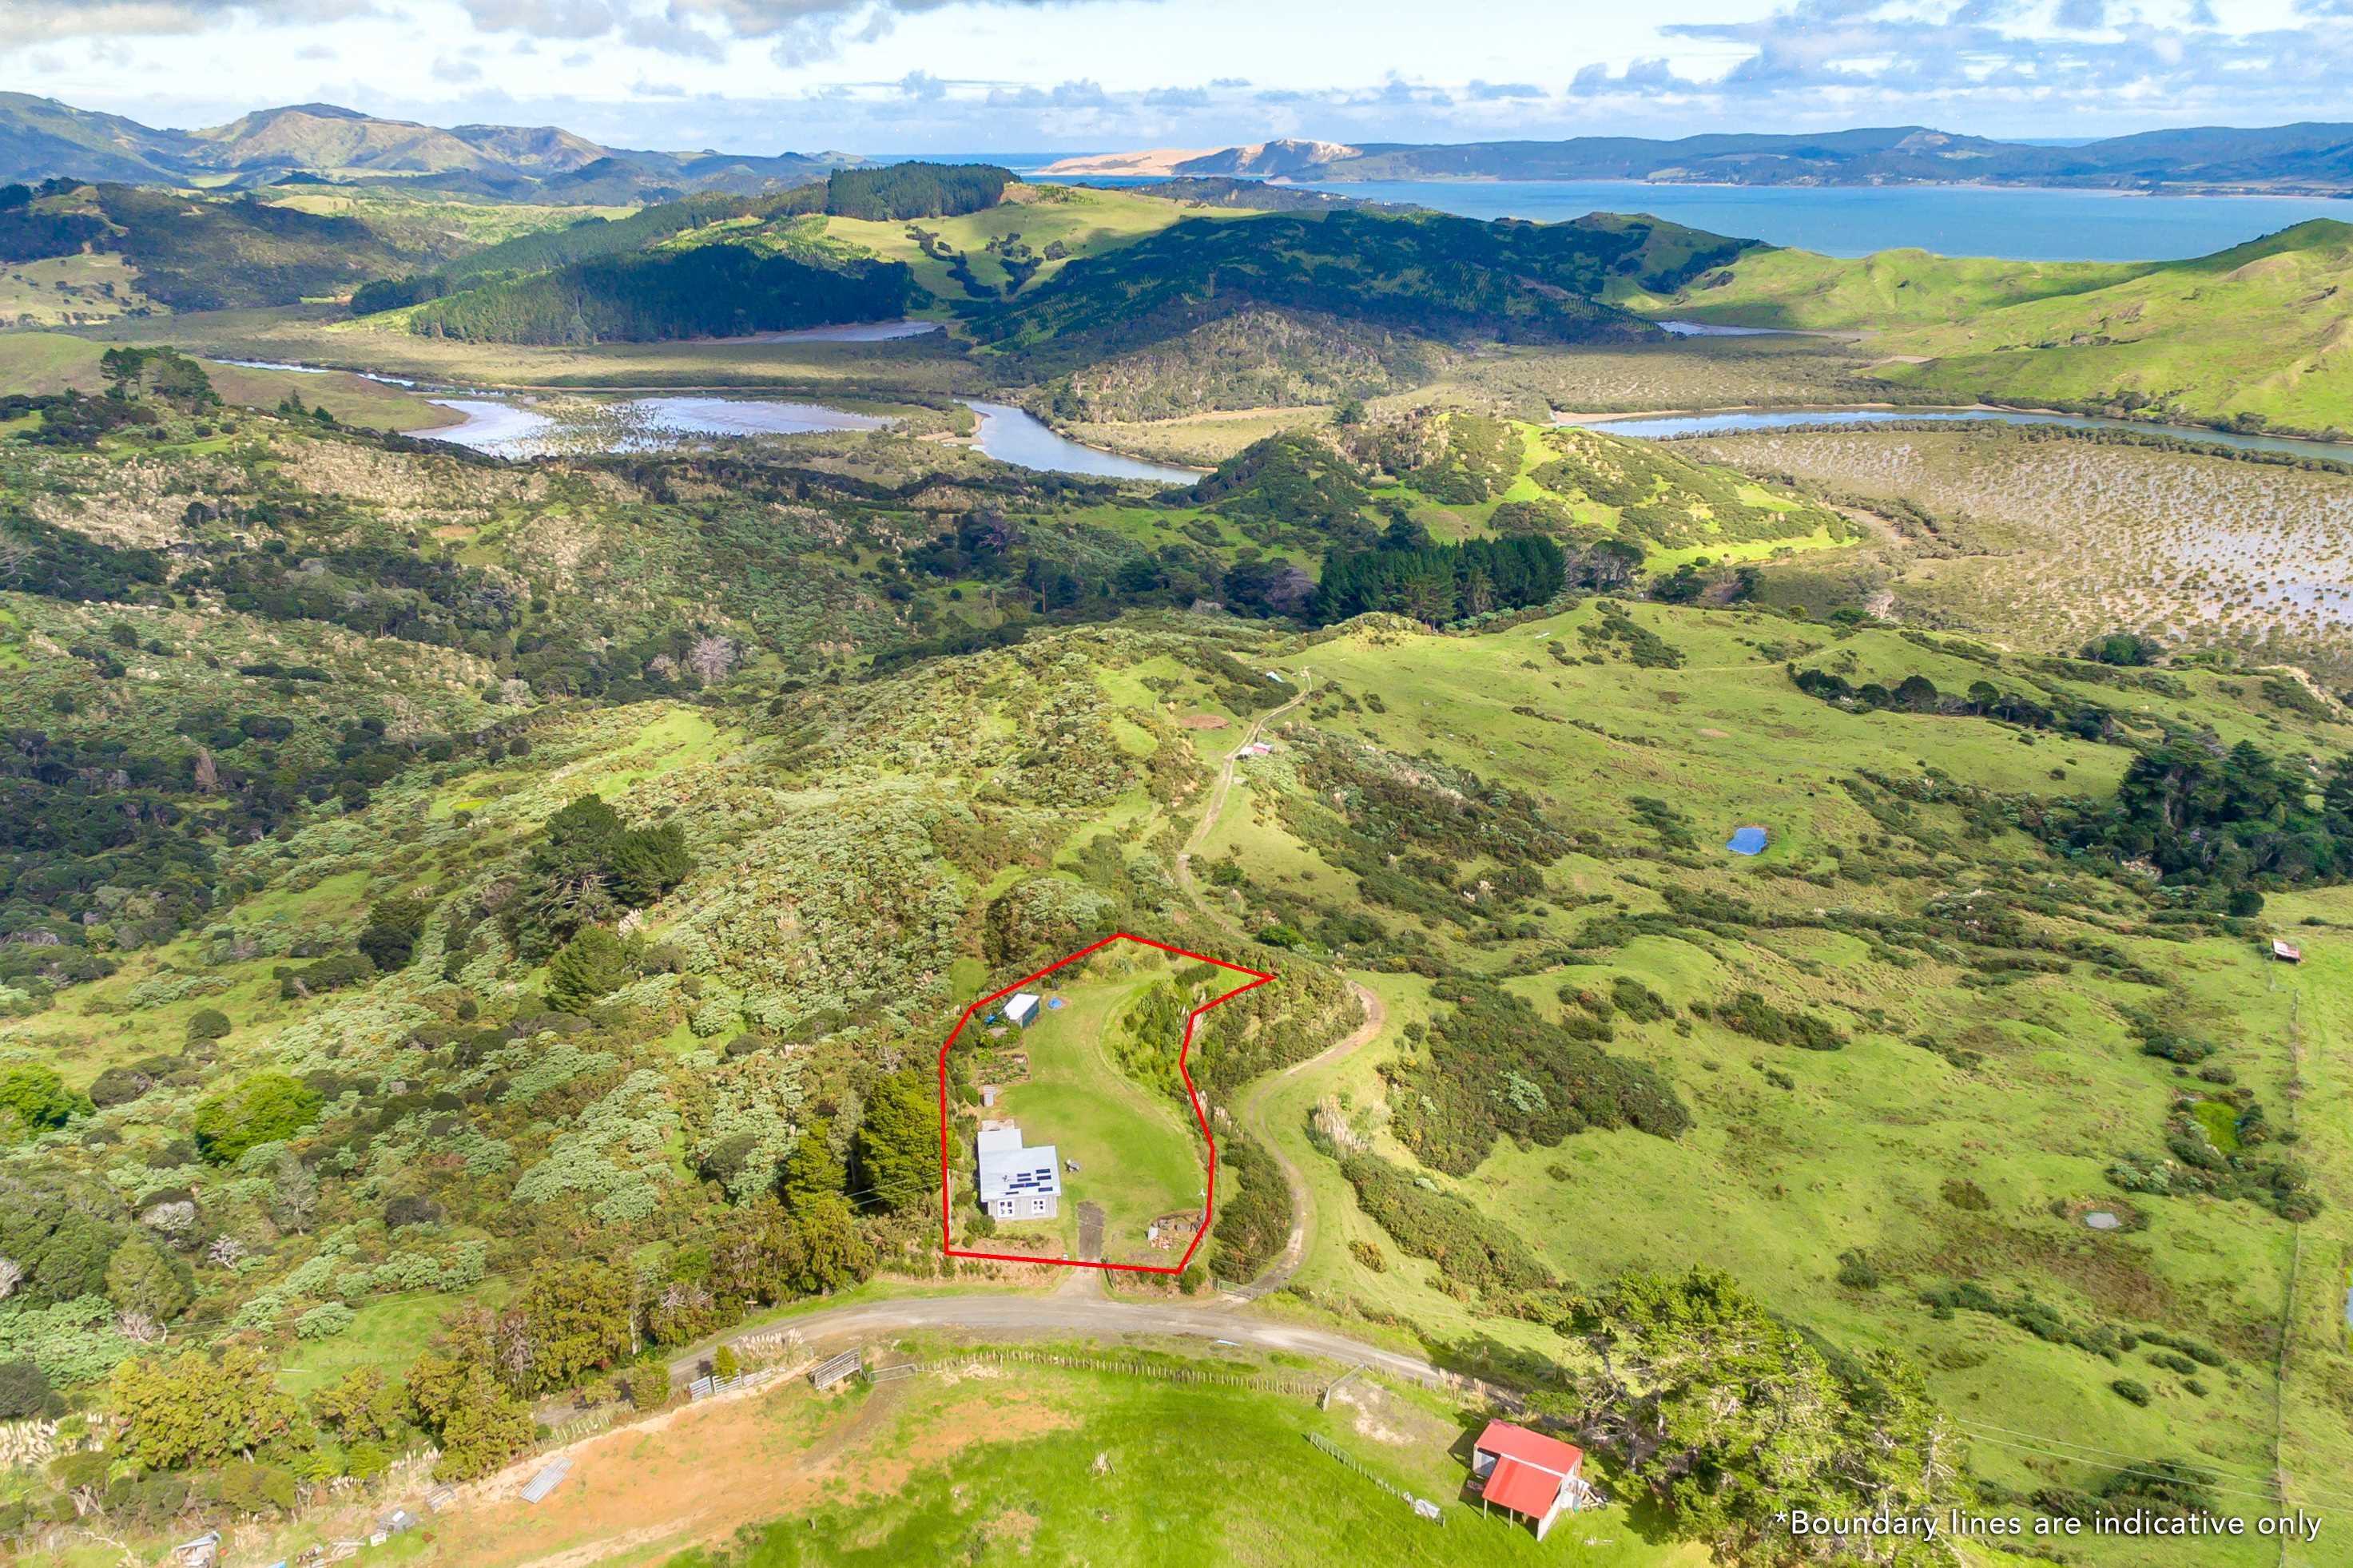 Real Estate For Sale Houses & Apartments : Panoramic views Hokianga UNDER CONTRACT